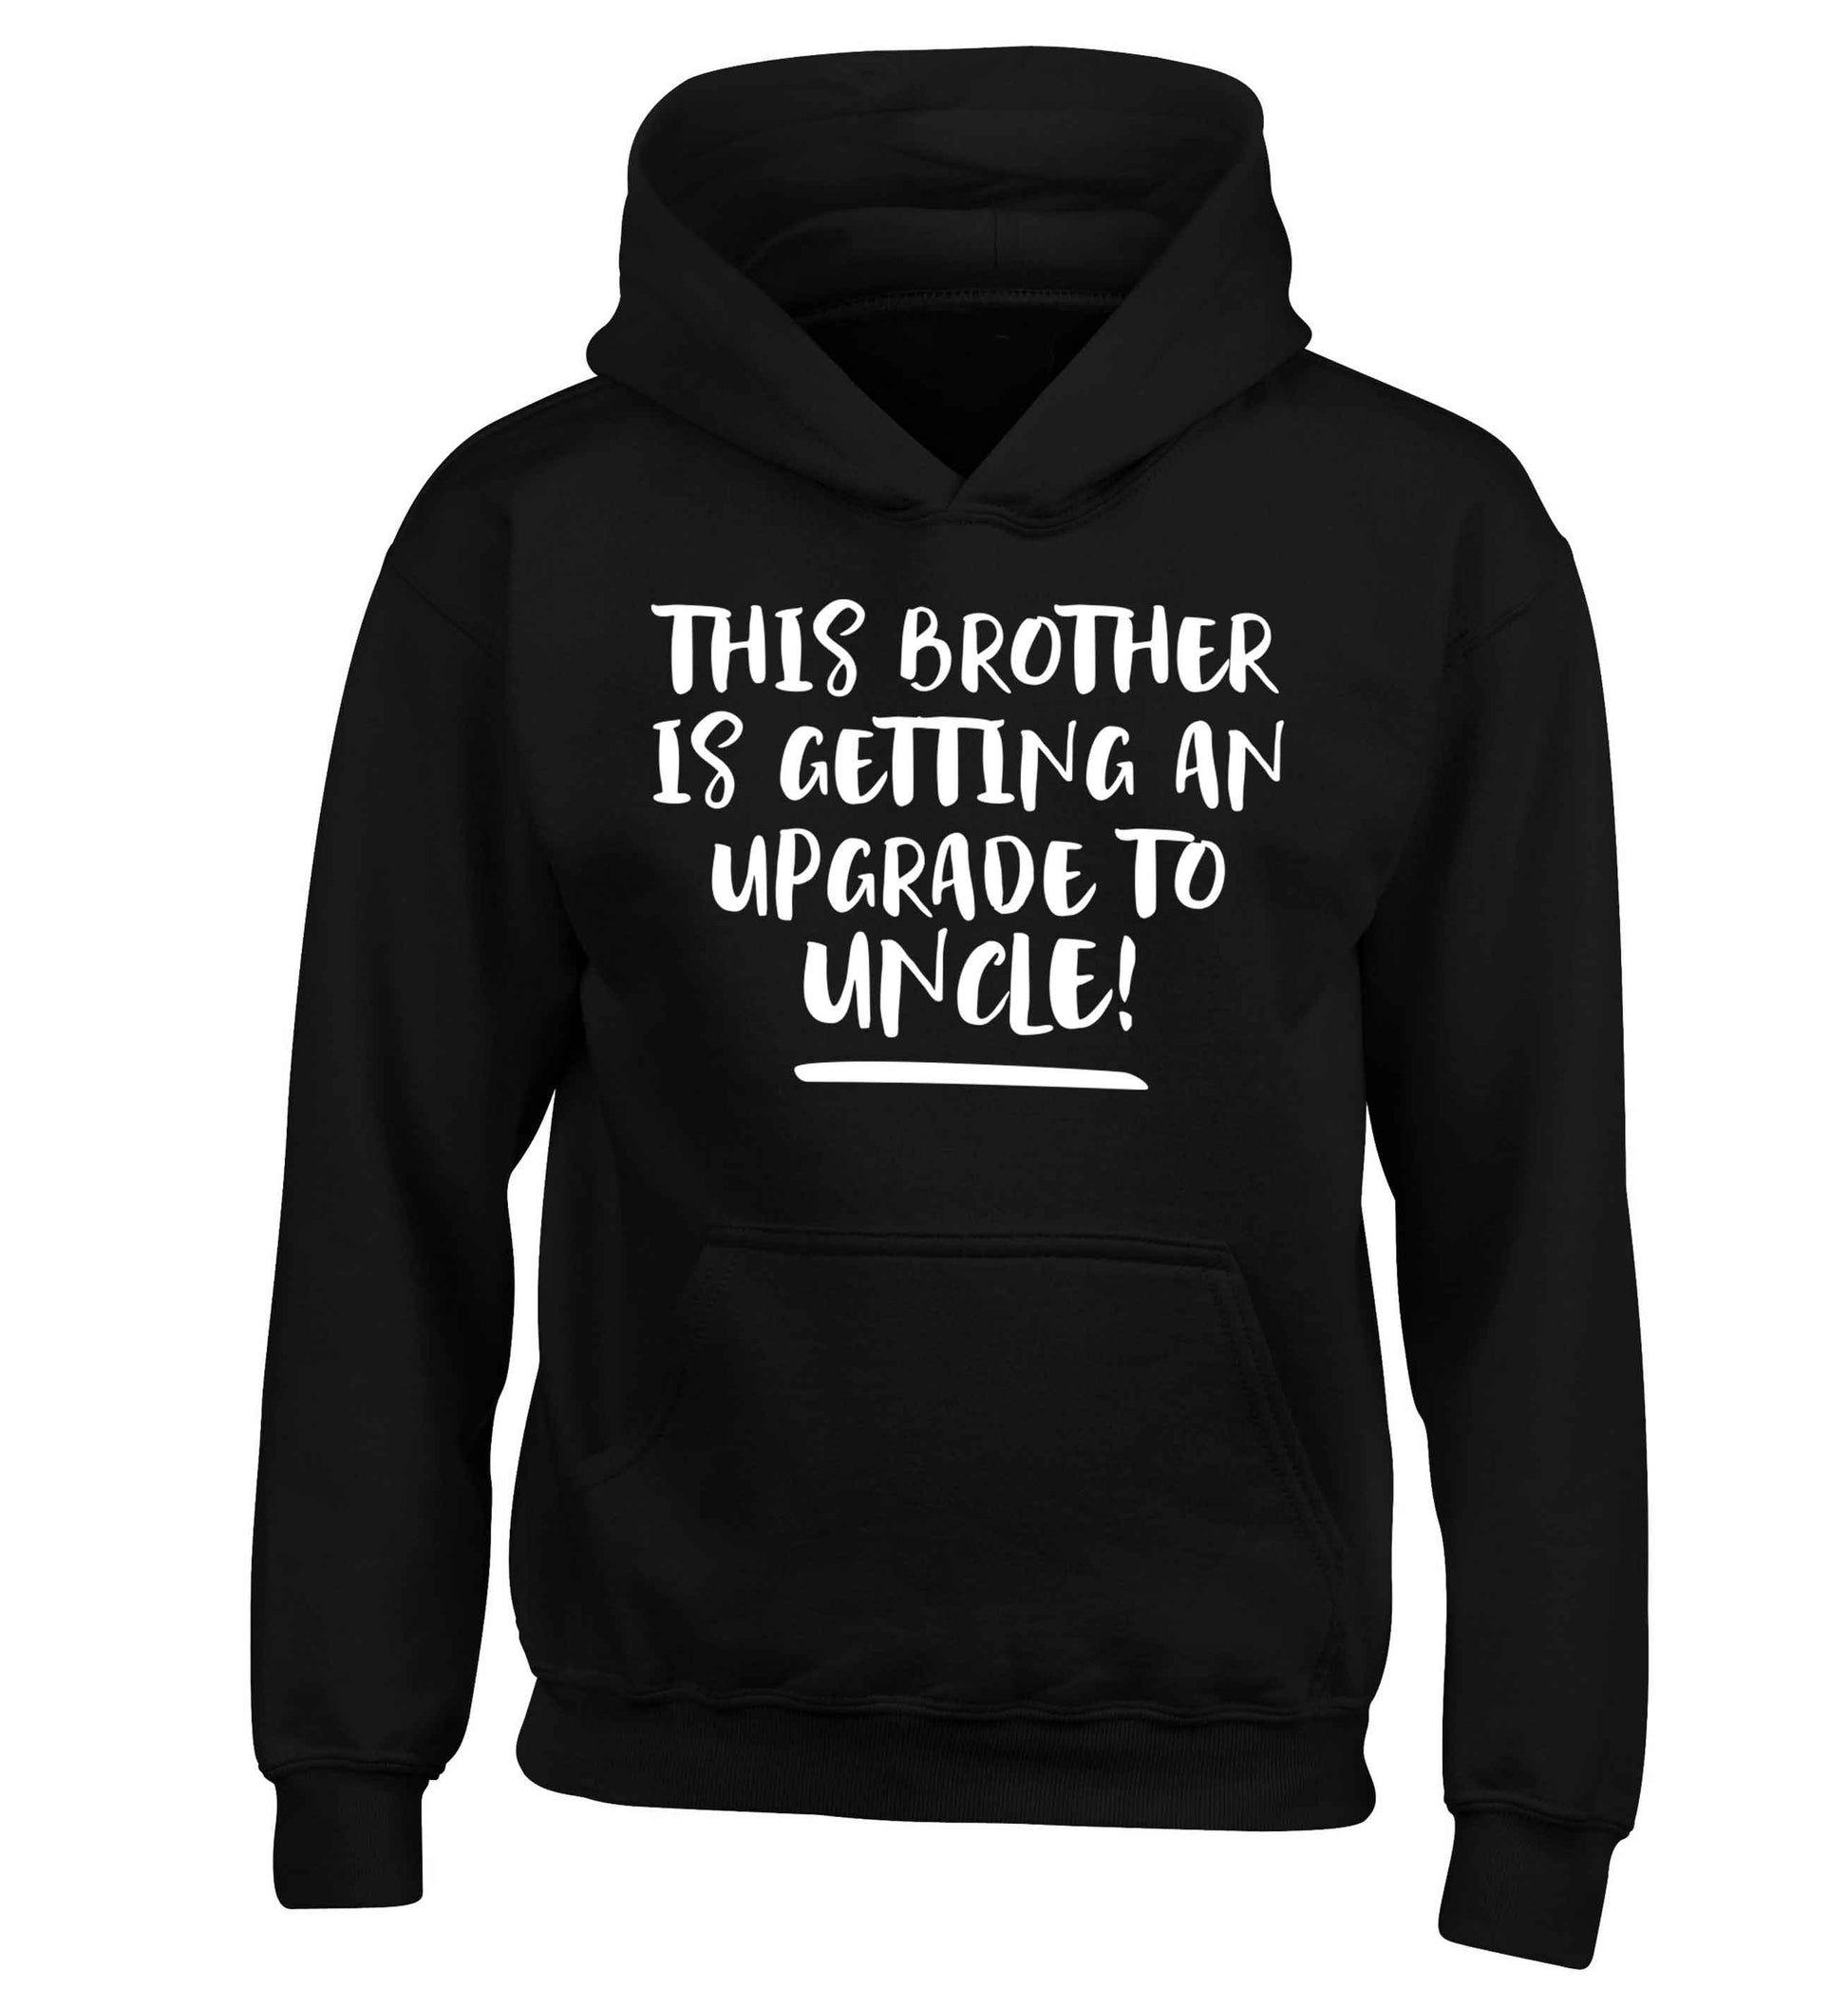 This brother is getting an upgrade to uncle! children's black hoodie 12-13 Years